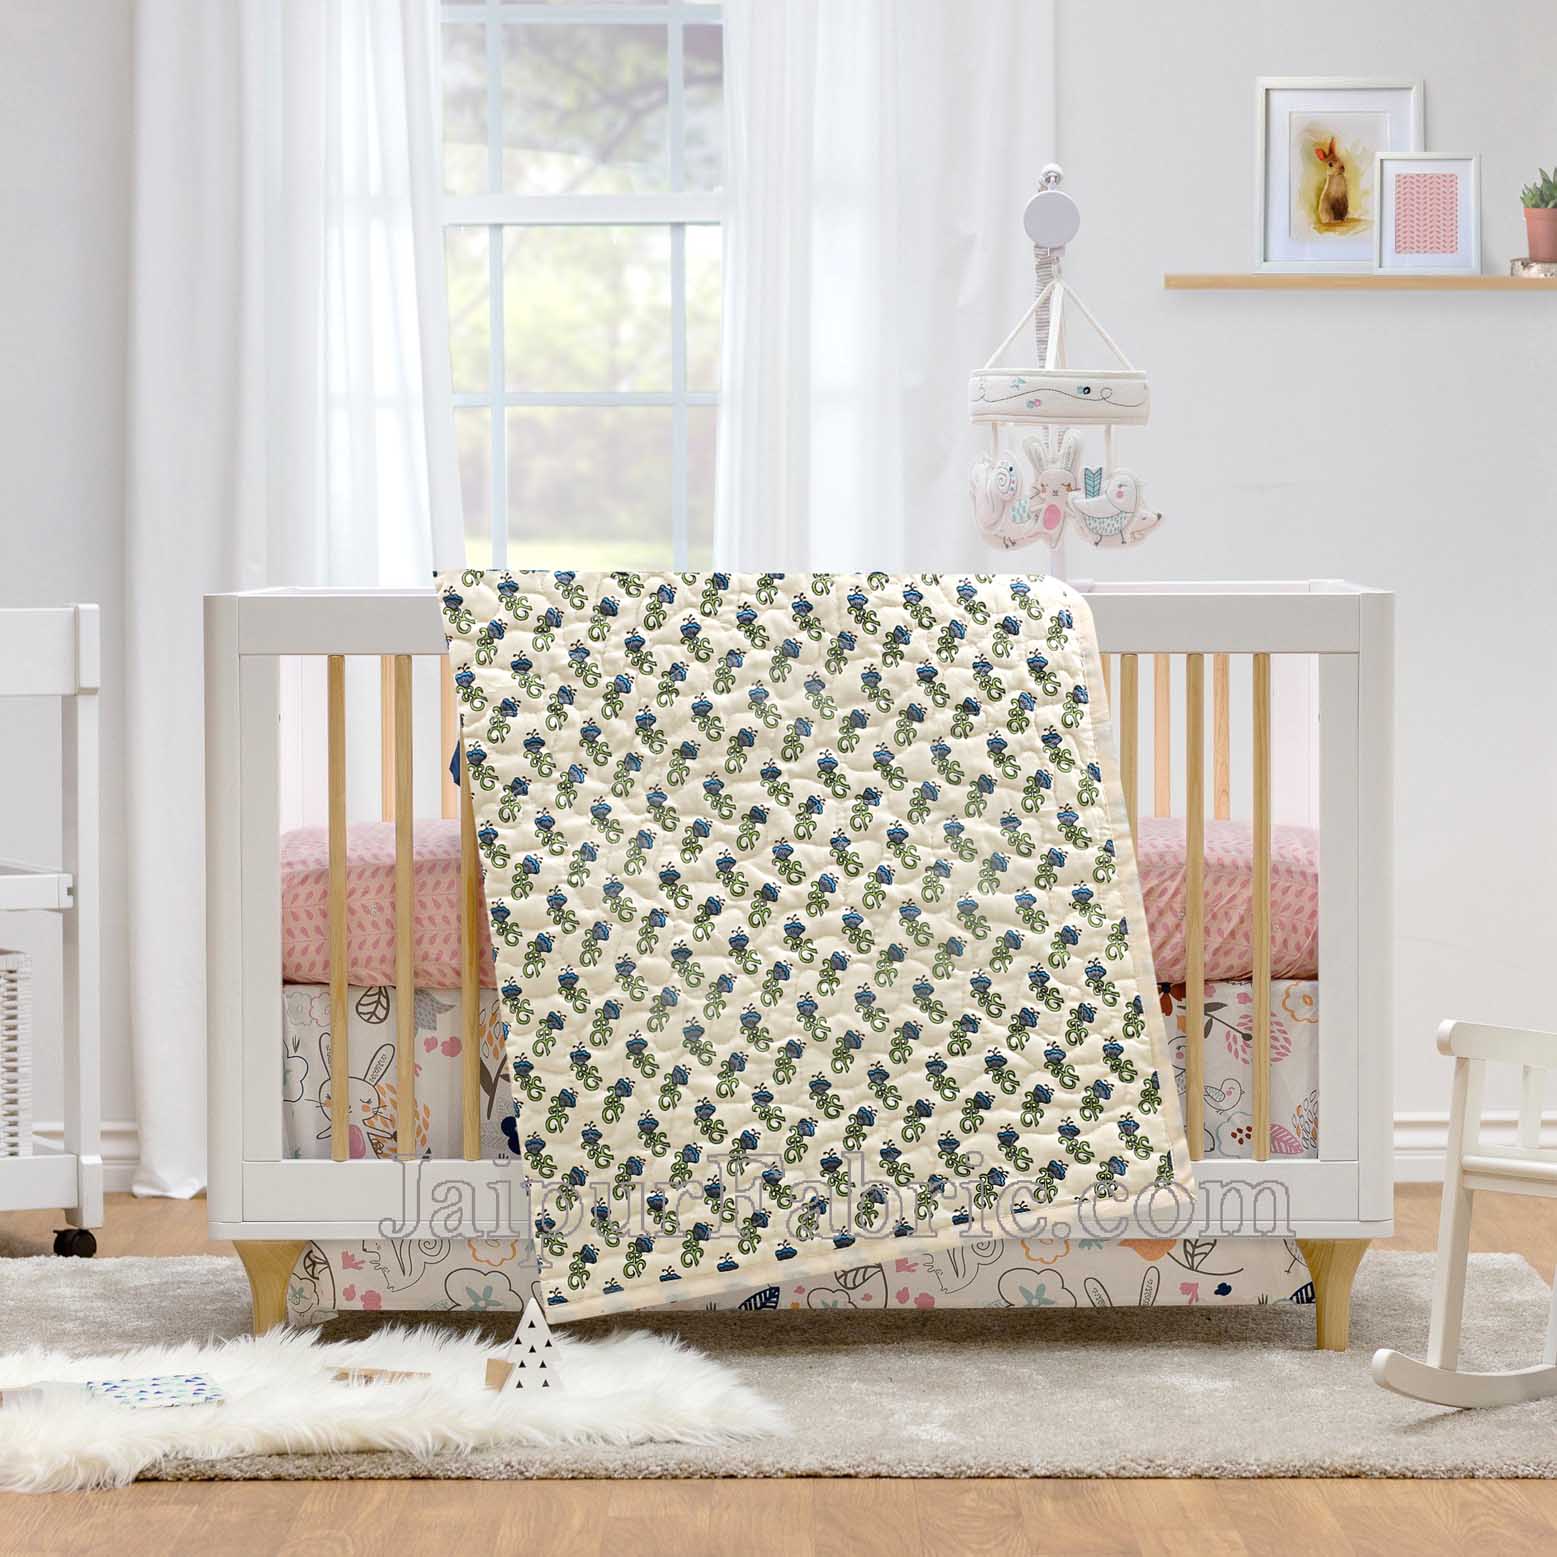 Baby Blanket Newborn Green & Grey Soft Crib Comforter and Toddler Swaddling Blankets for Babies 120 x 120 cm Colourful Cream Base Baby Quilt